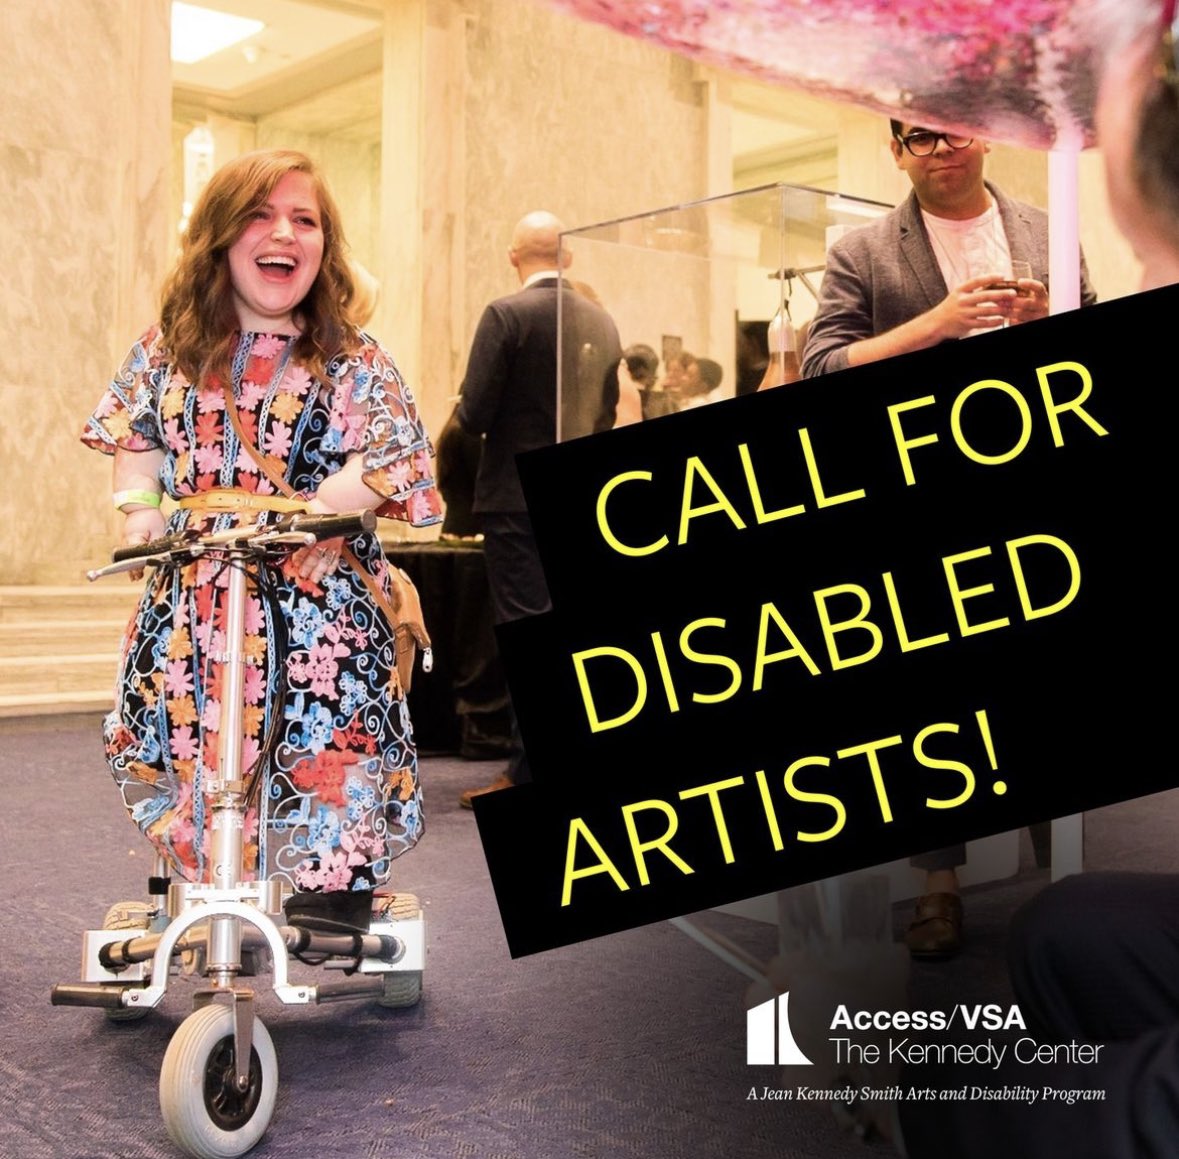 Applications are now being accepted for the John F. Kennedy Center’s VSA Emerging Young Artists Program for visual artists, ages 16 to 25, with disabilities. Learn more: kennedy-center.org/education/oppo…